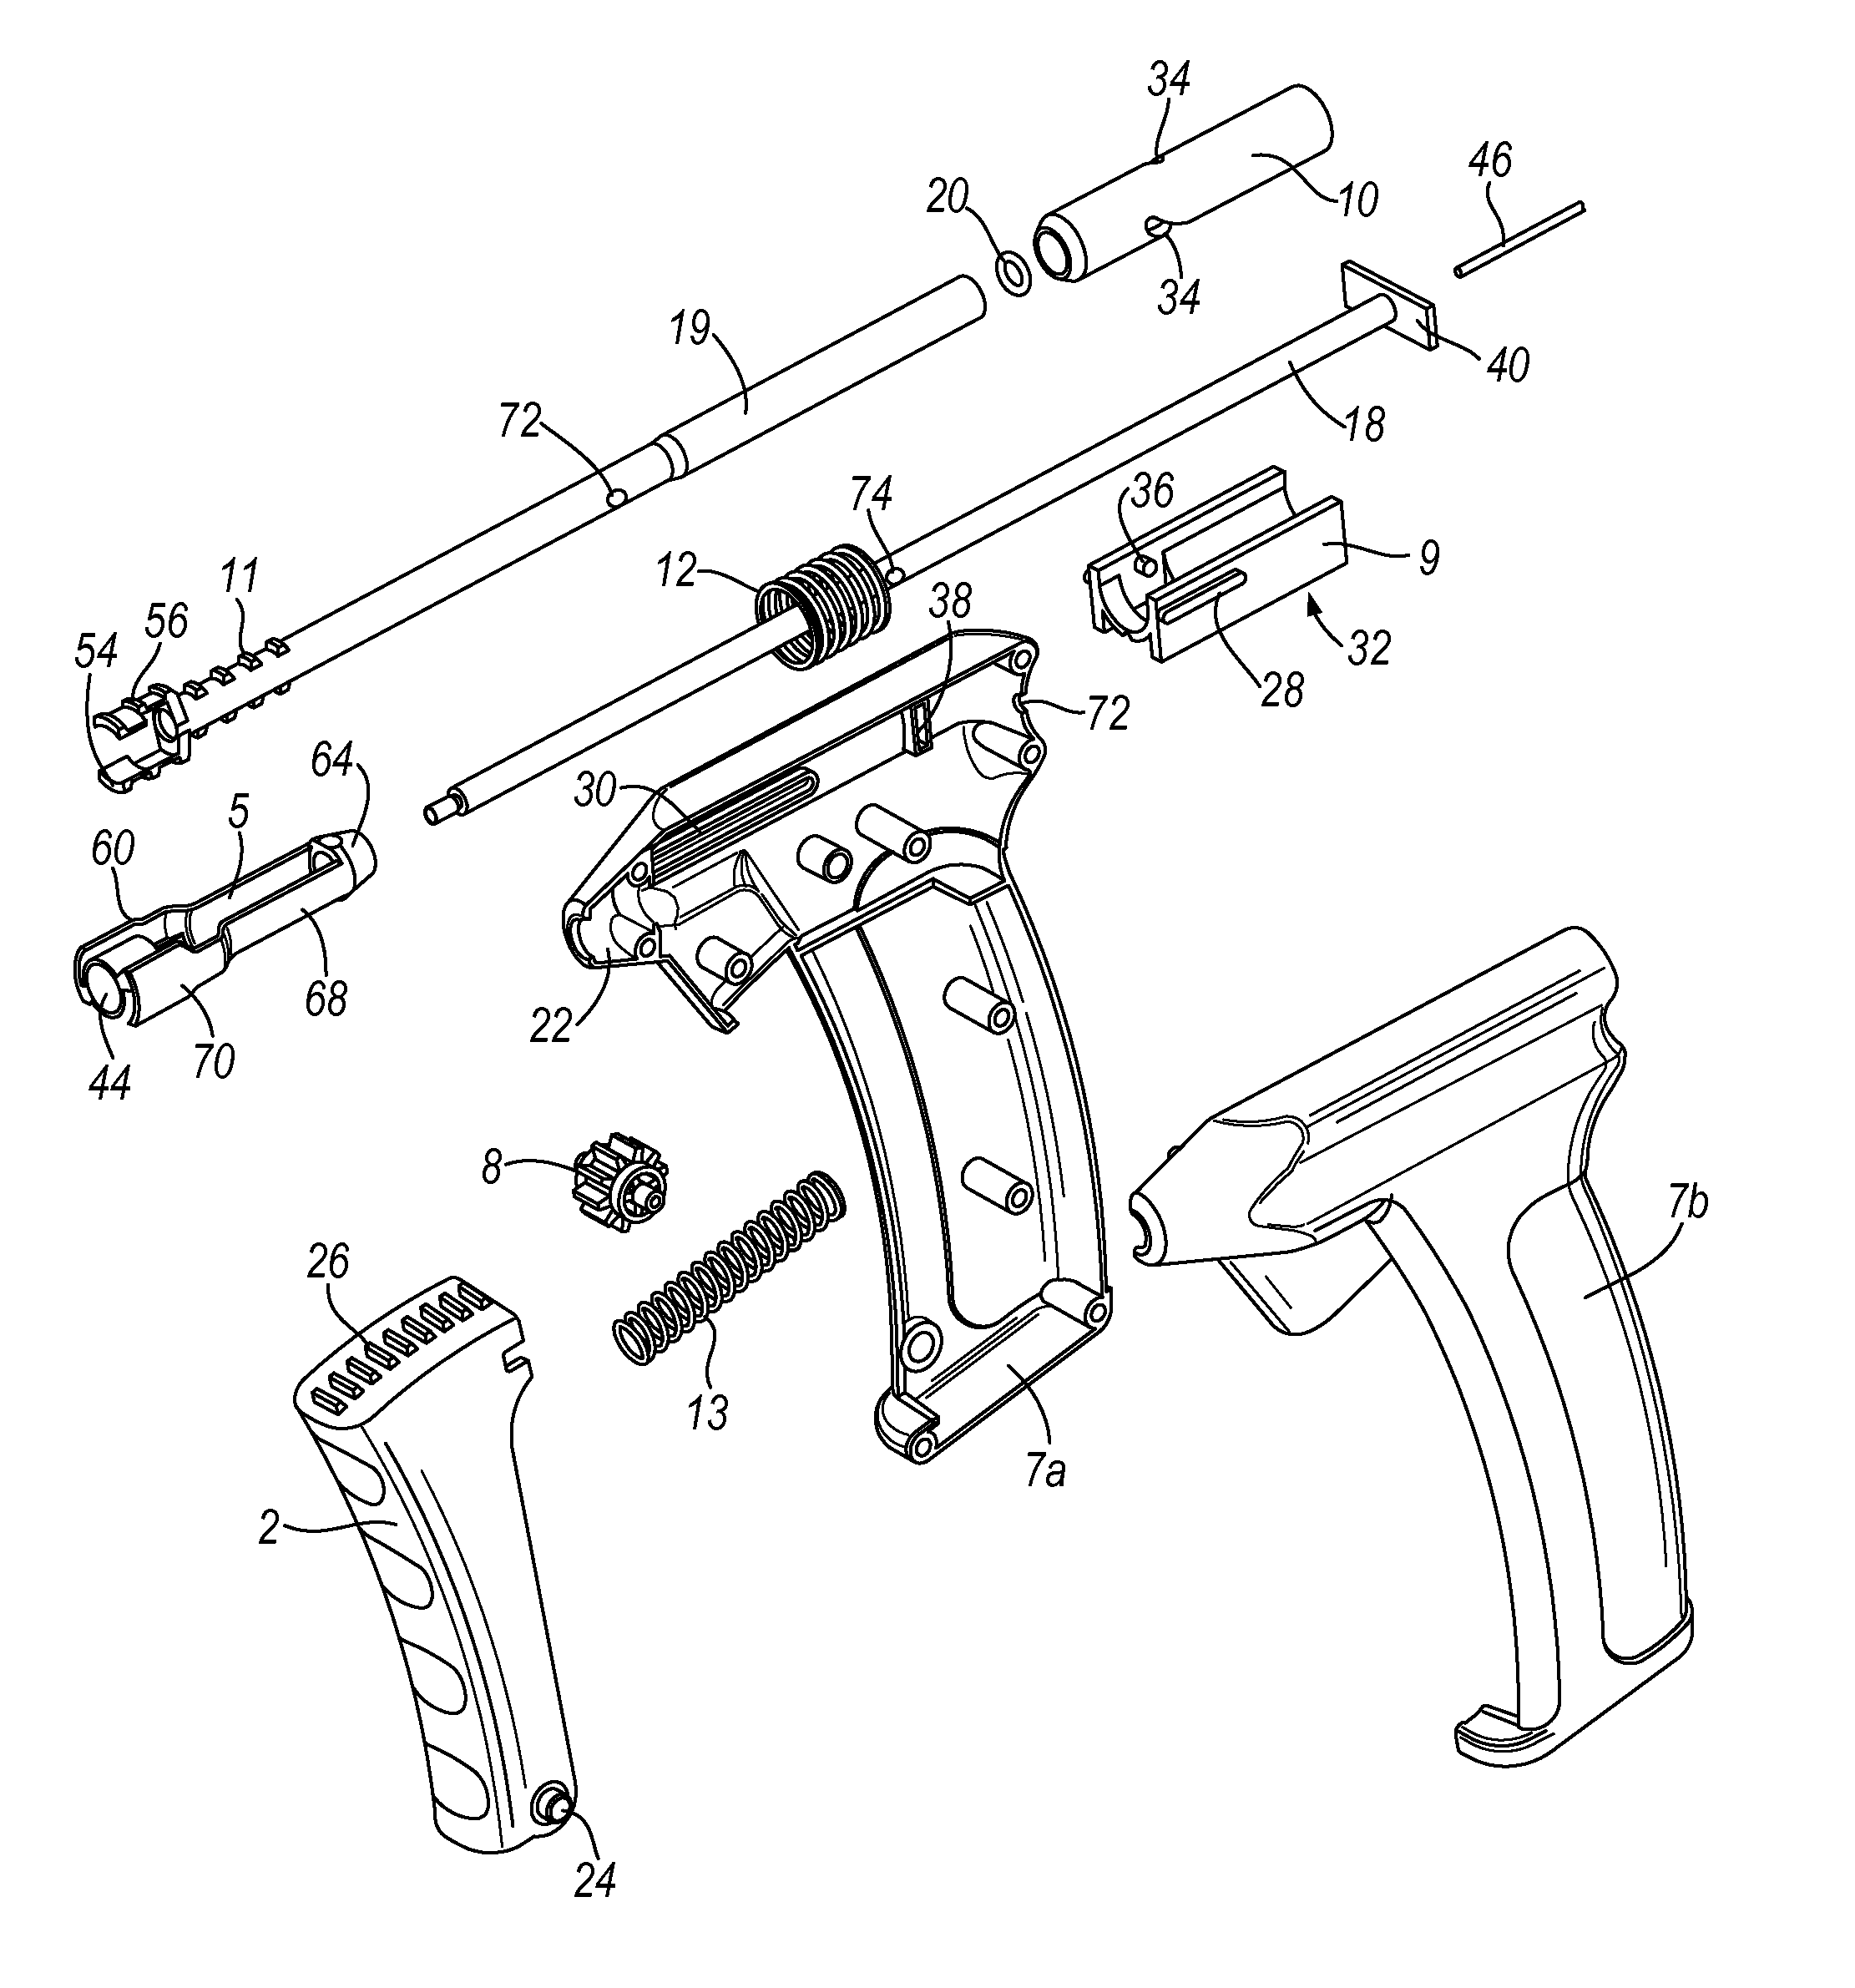 Device for applying successive resilient ligating bands to tissue